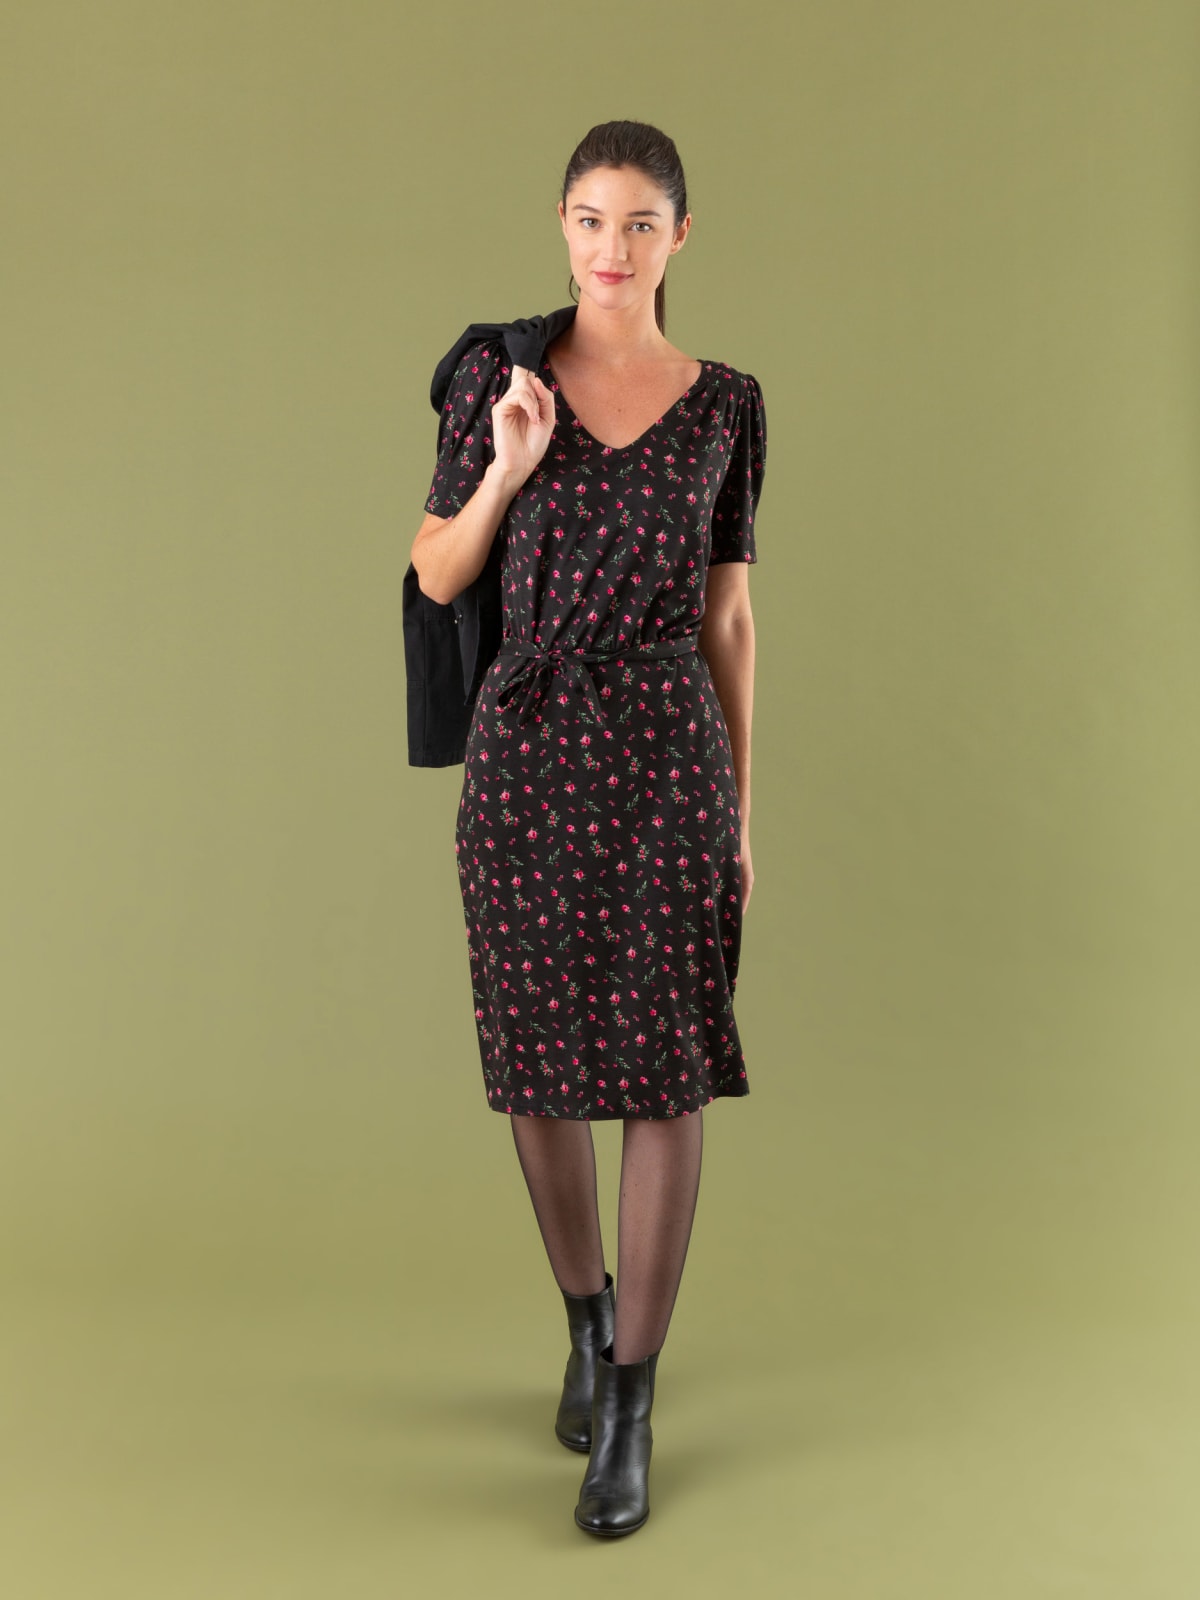 New Pommier dress in floral print jersey